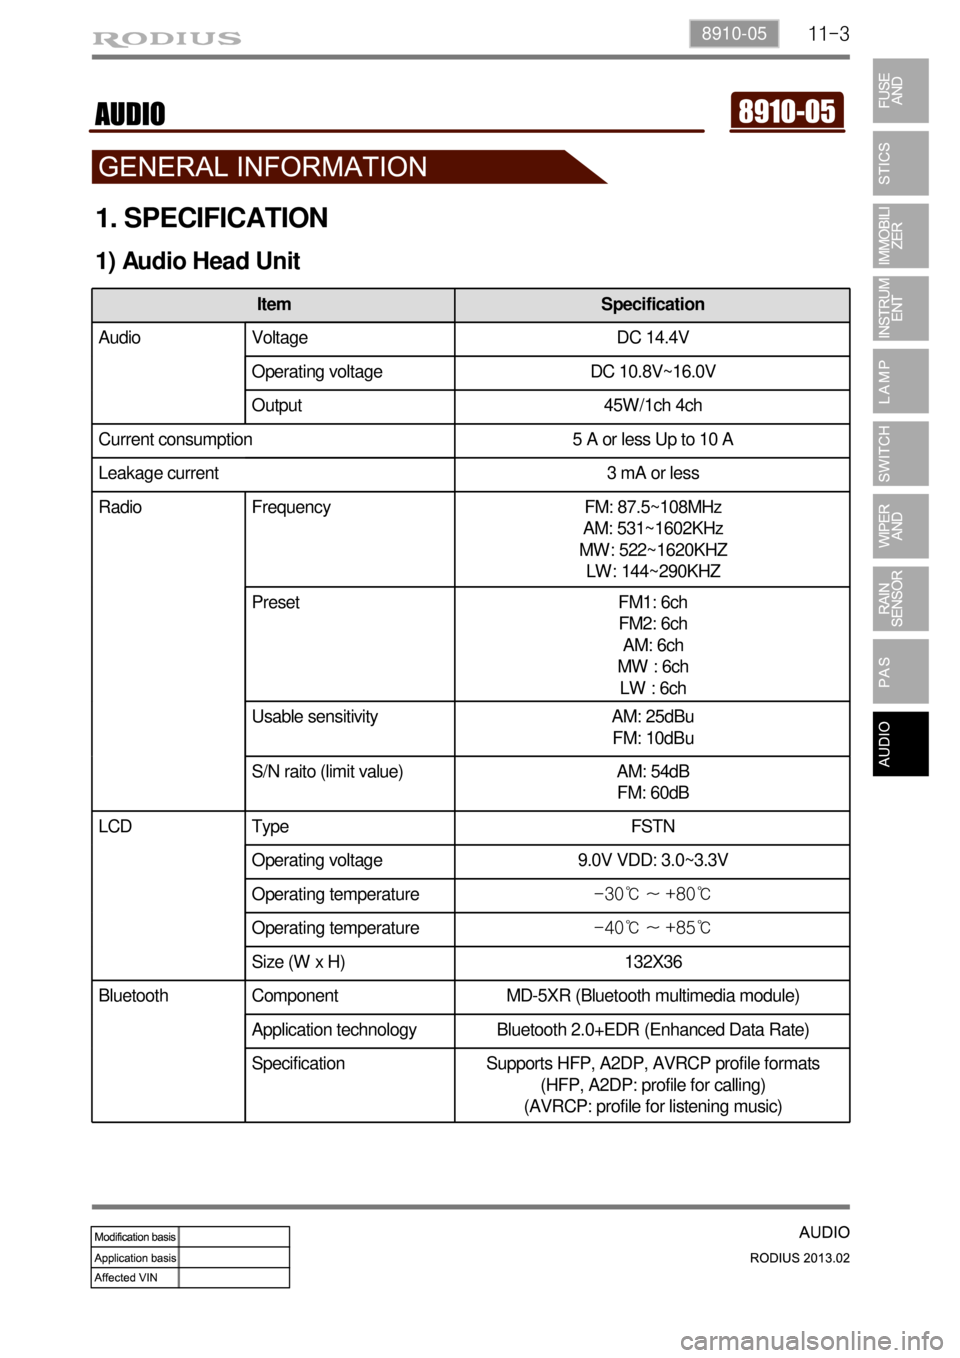 SSANGYONG TURISMO 2013  Service Manual 11-38910-05
1. SPECIFICATION
1) Audio Head Unit
Item Specification
Audio Voltage DC 14.4V
Operating voltage DC 10.8V~16.0V
Output 45W/1ch 4ch
Current consumption 5 A or less Up to 10 A
Leakage current